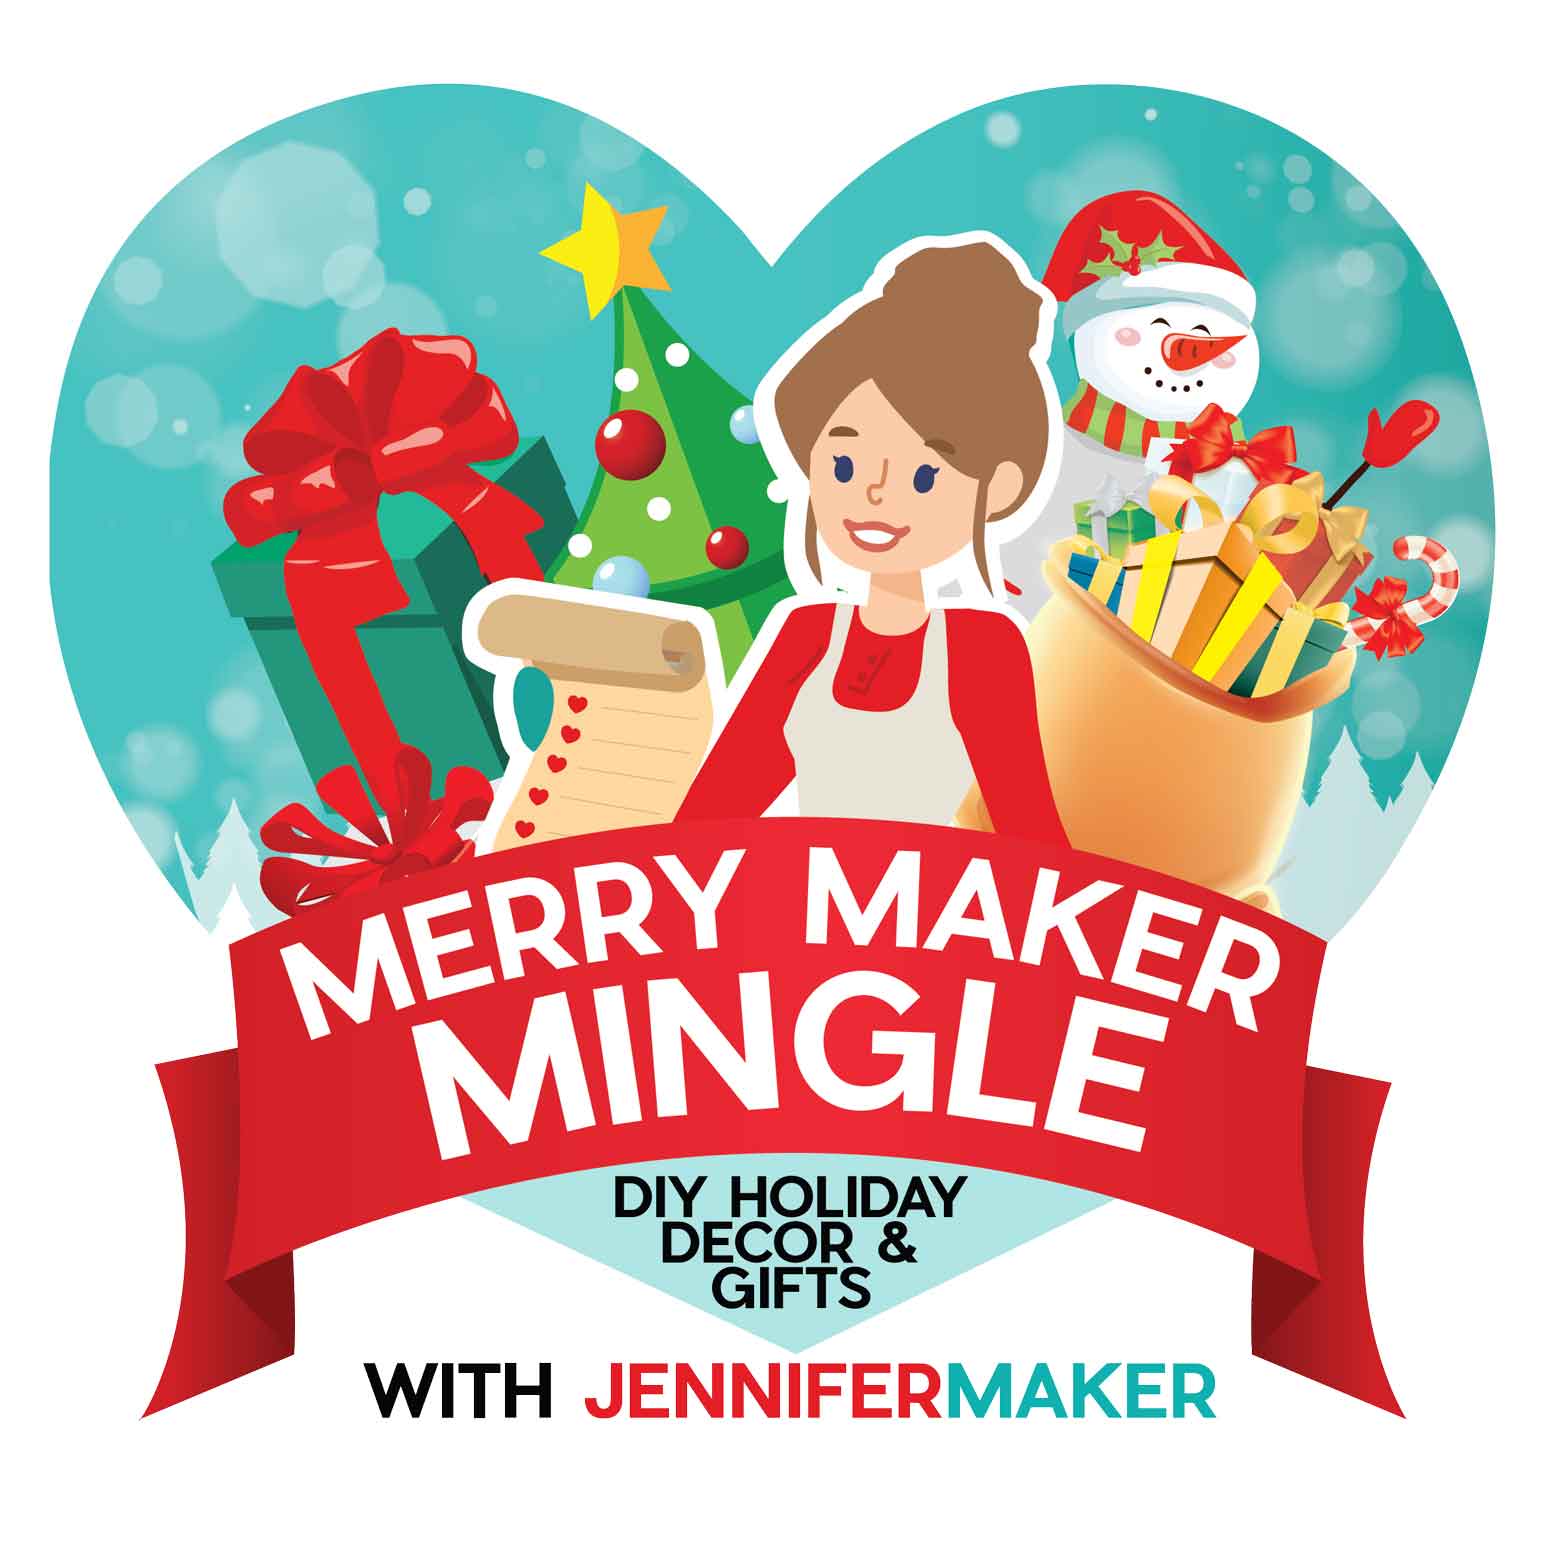 Merry Maker Mingle 2021: Our Annual Christmas Craft Countdown!